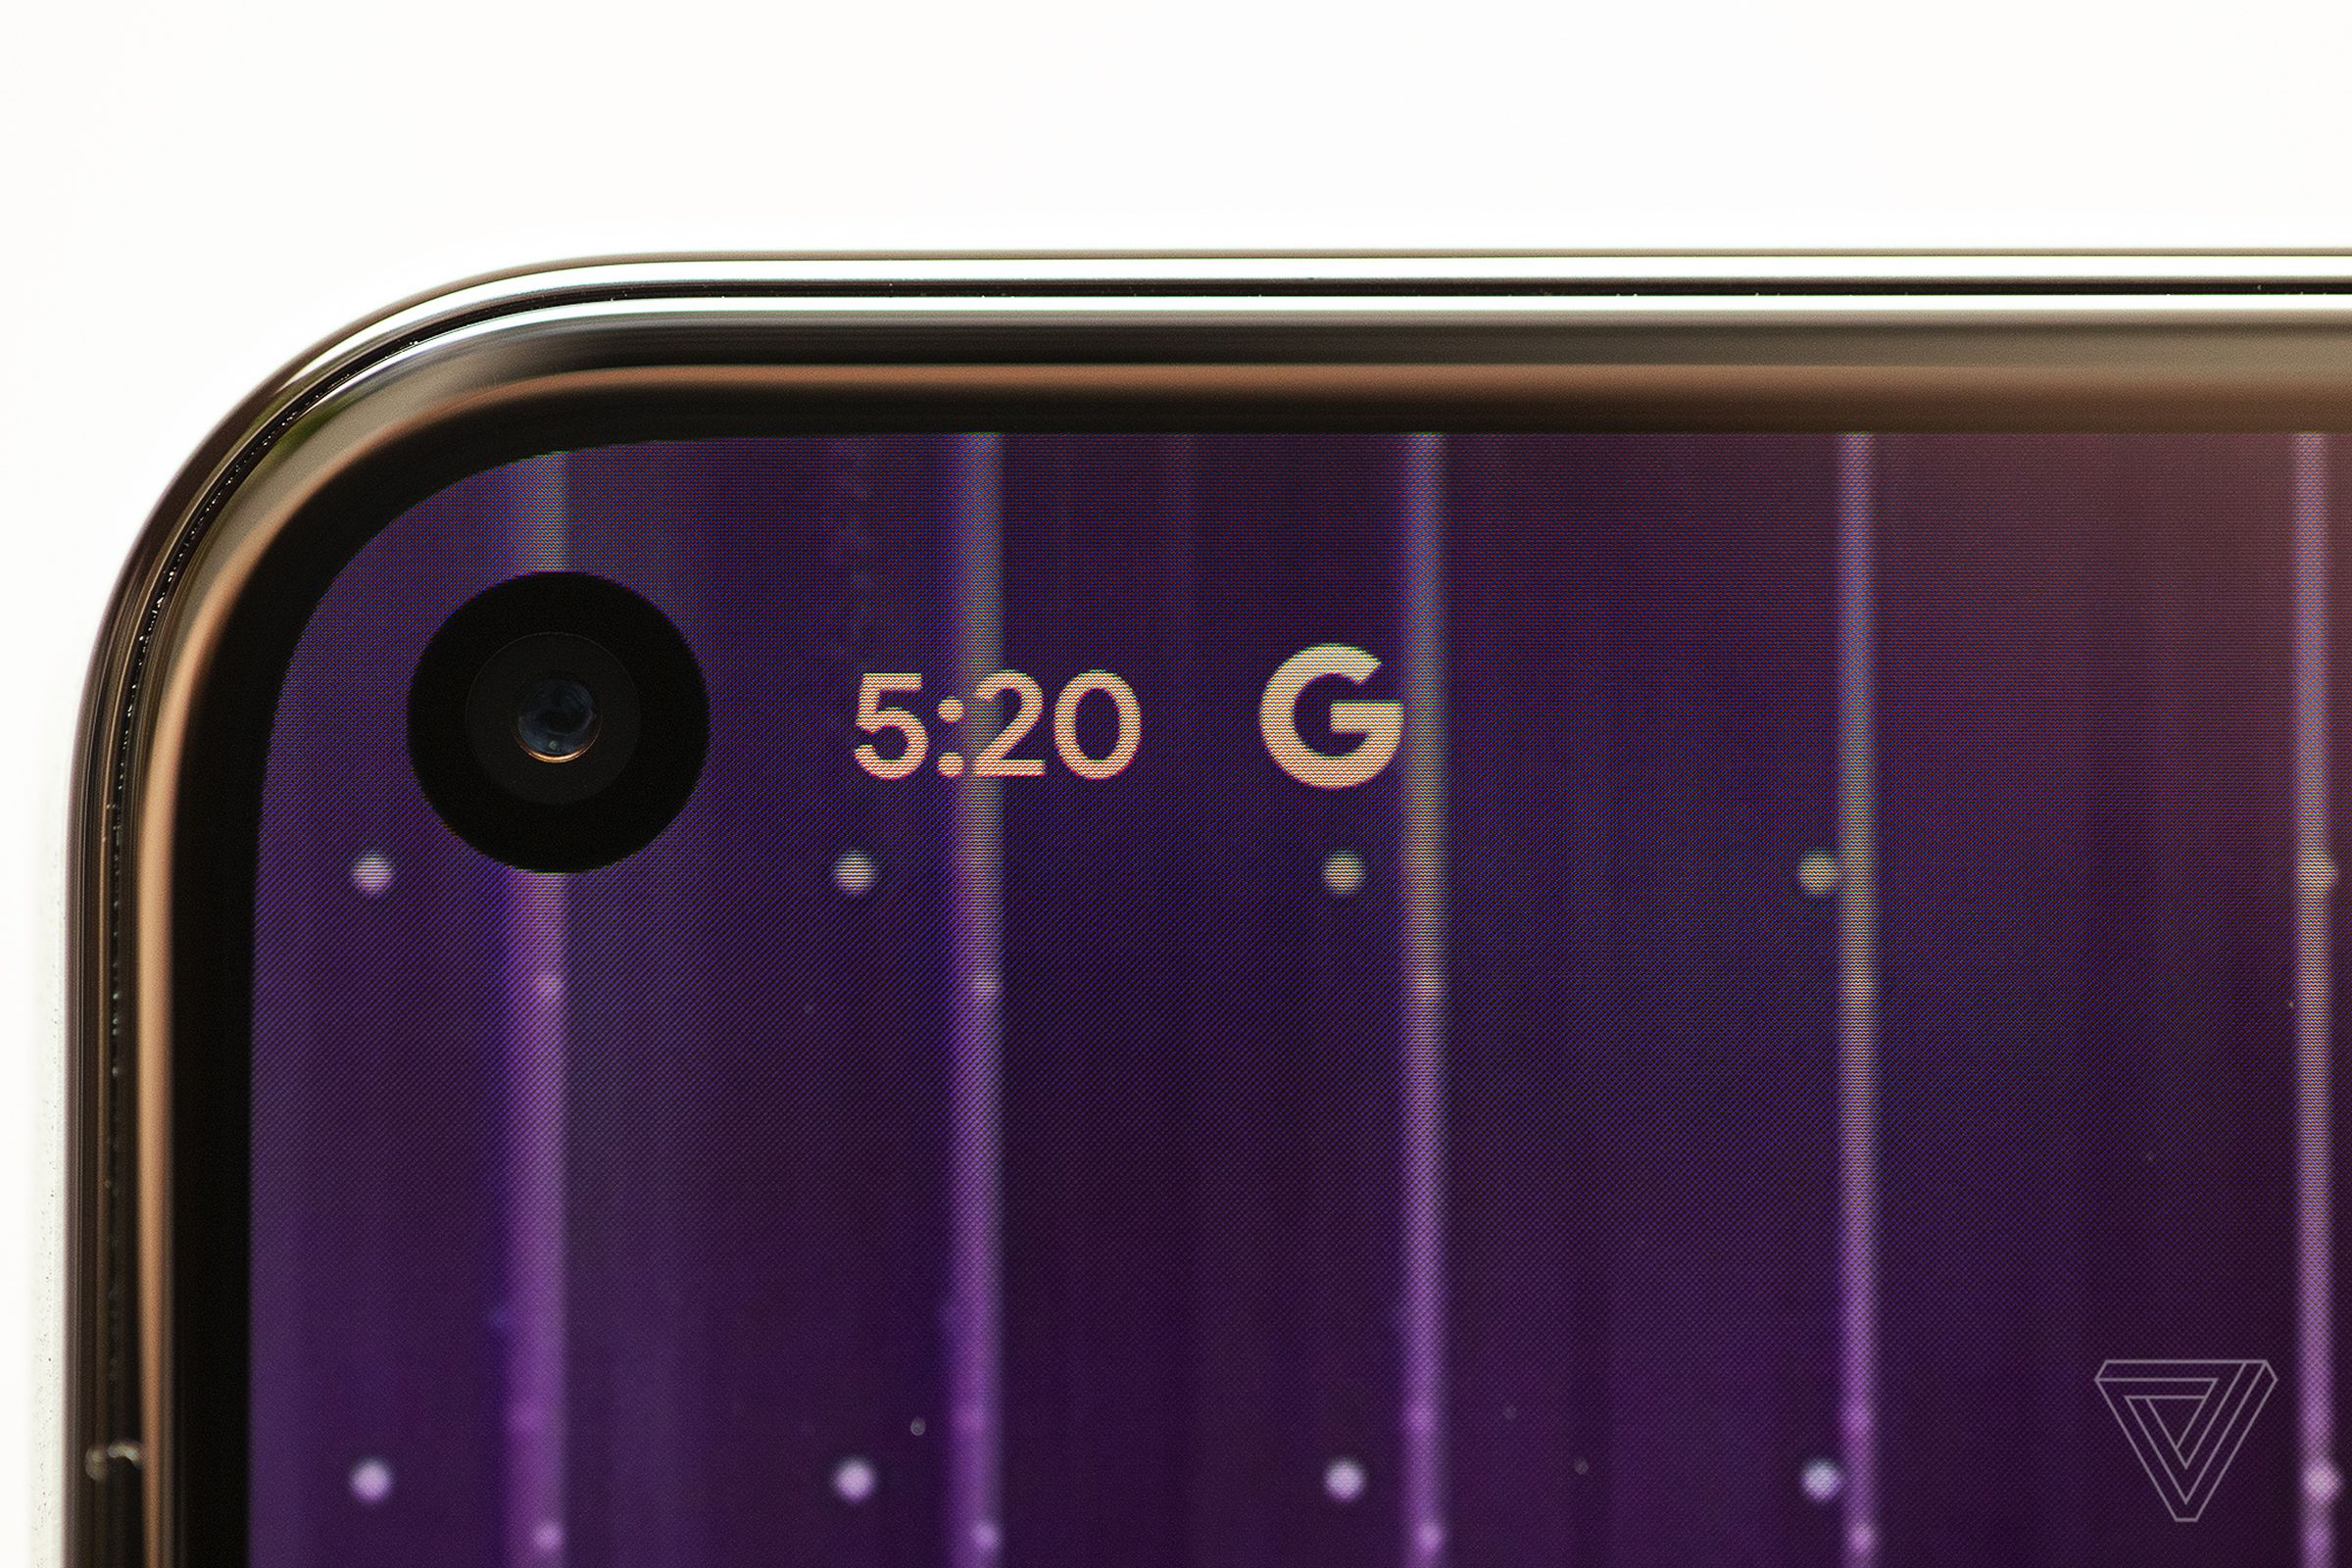 The hole punch selfie camera and thin bezels on the Pixel 5